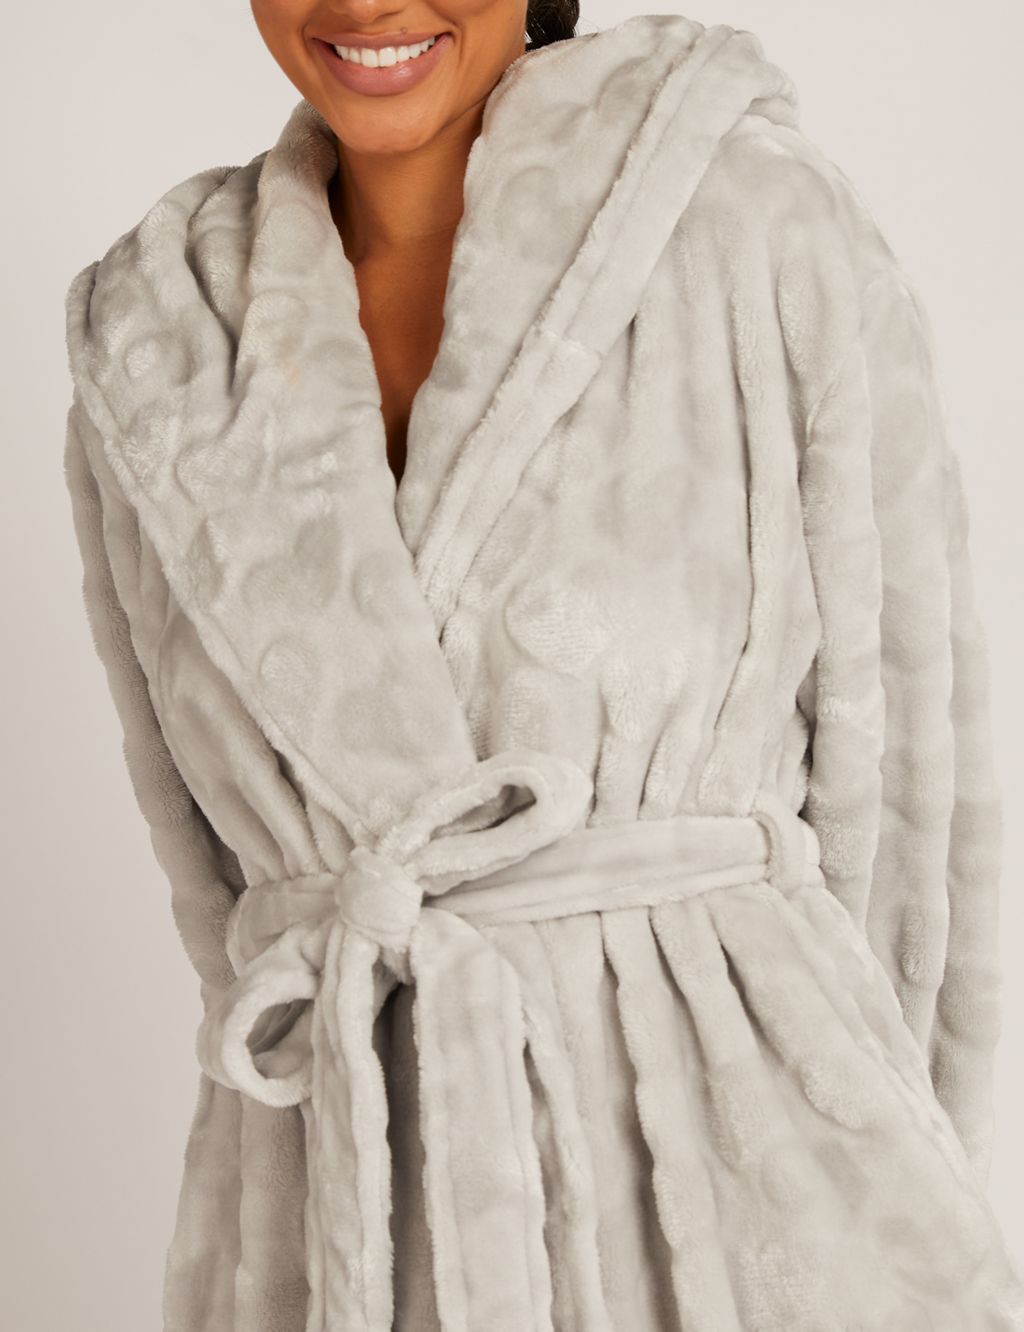 Faux Fur Heart Hooded Long Dressing Gown image 4